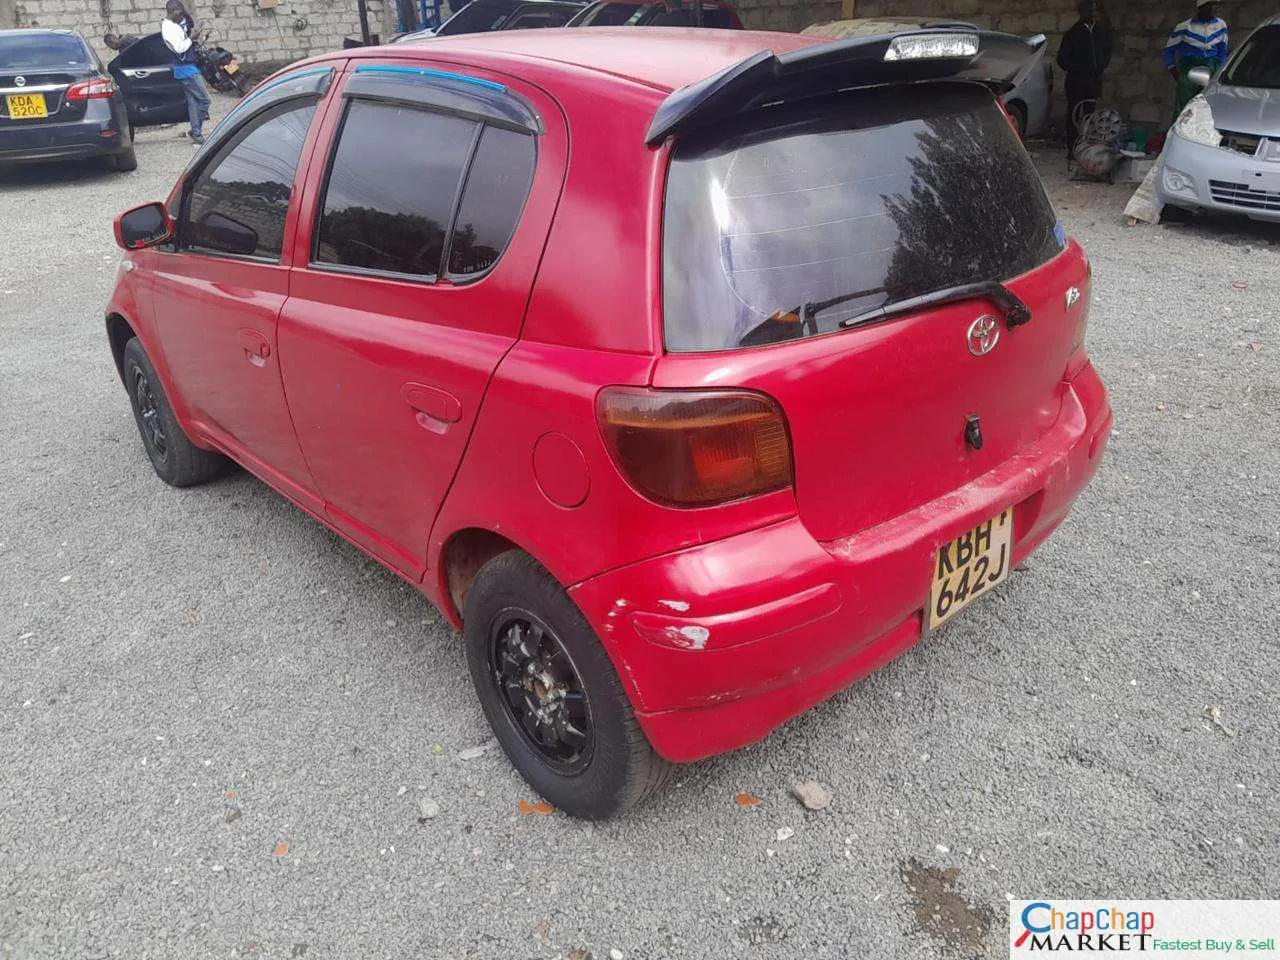 Toyota Vitz QUICK SALE You PAY 30% Deposit INSTALLMENTS Trade in Ok Hire purchase installments